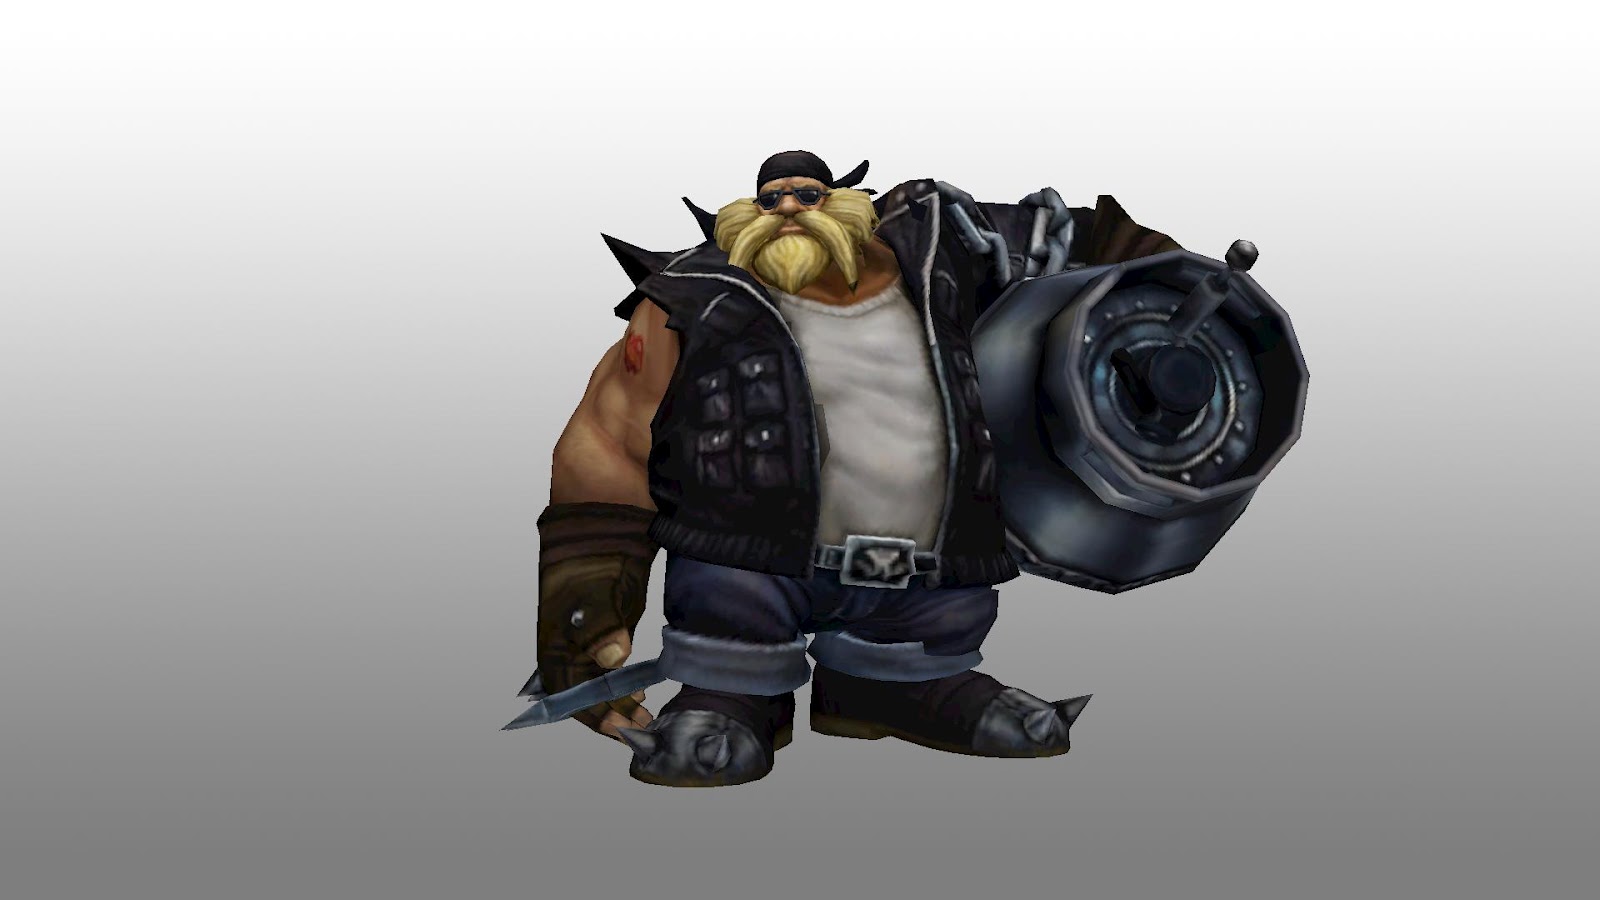 Gragas Skins: The best skins of Gragas (with Images)